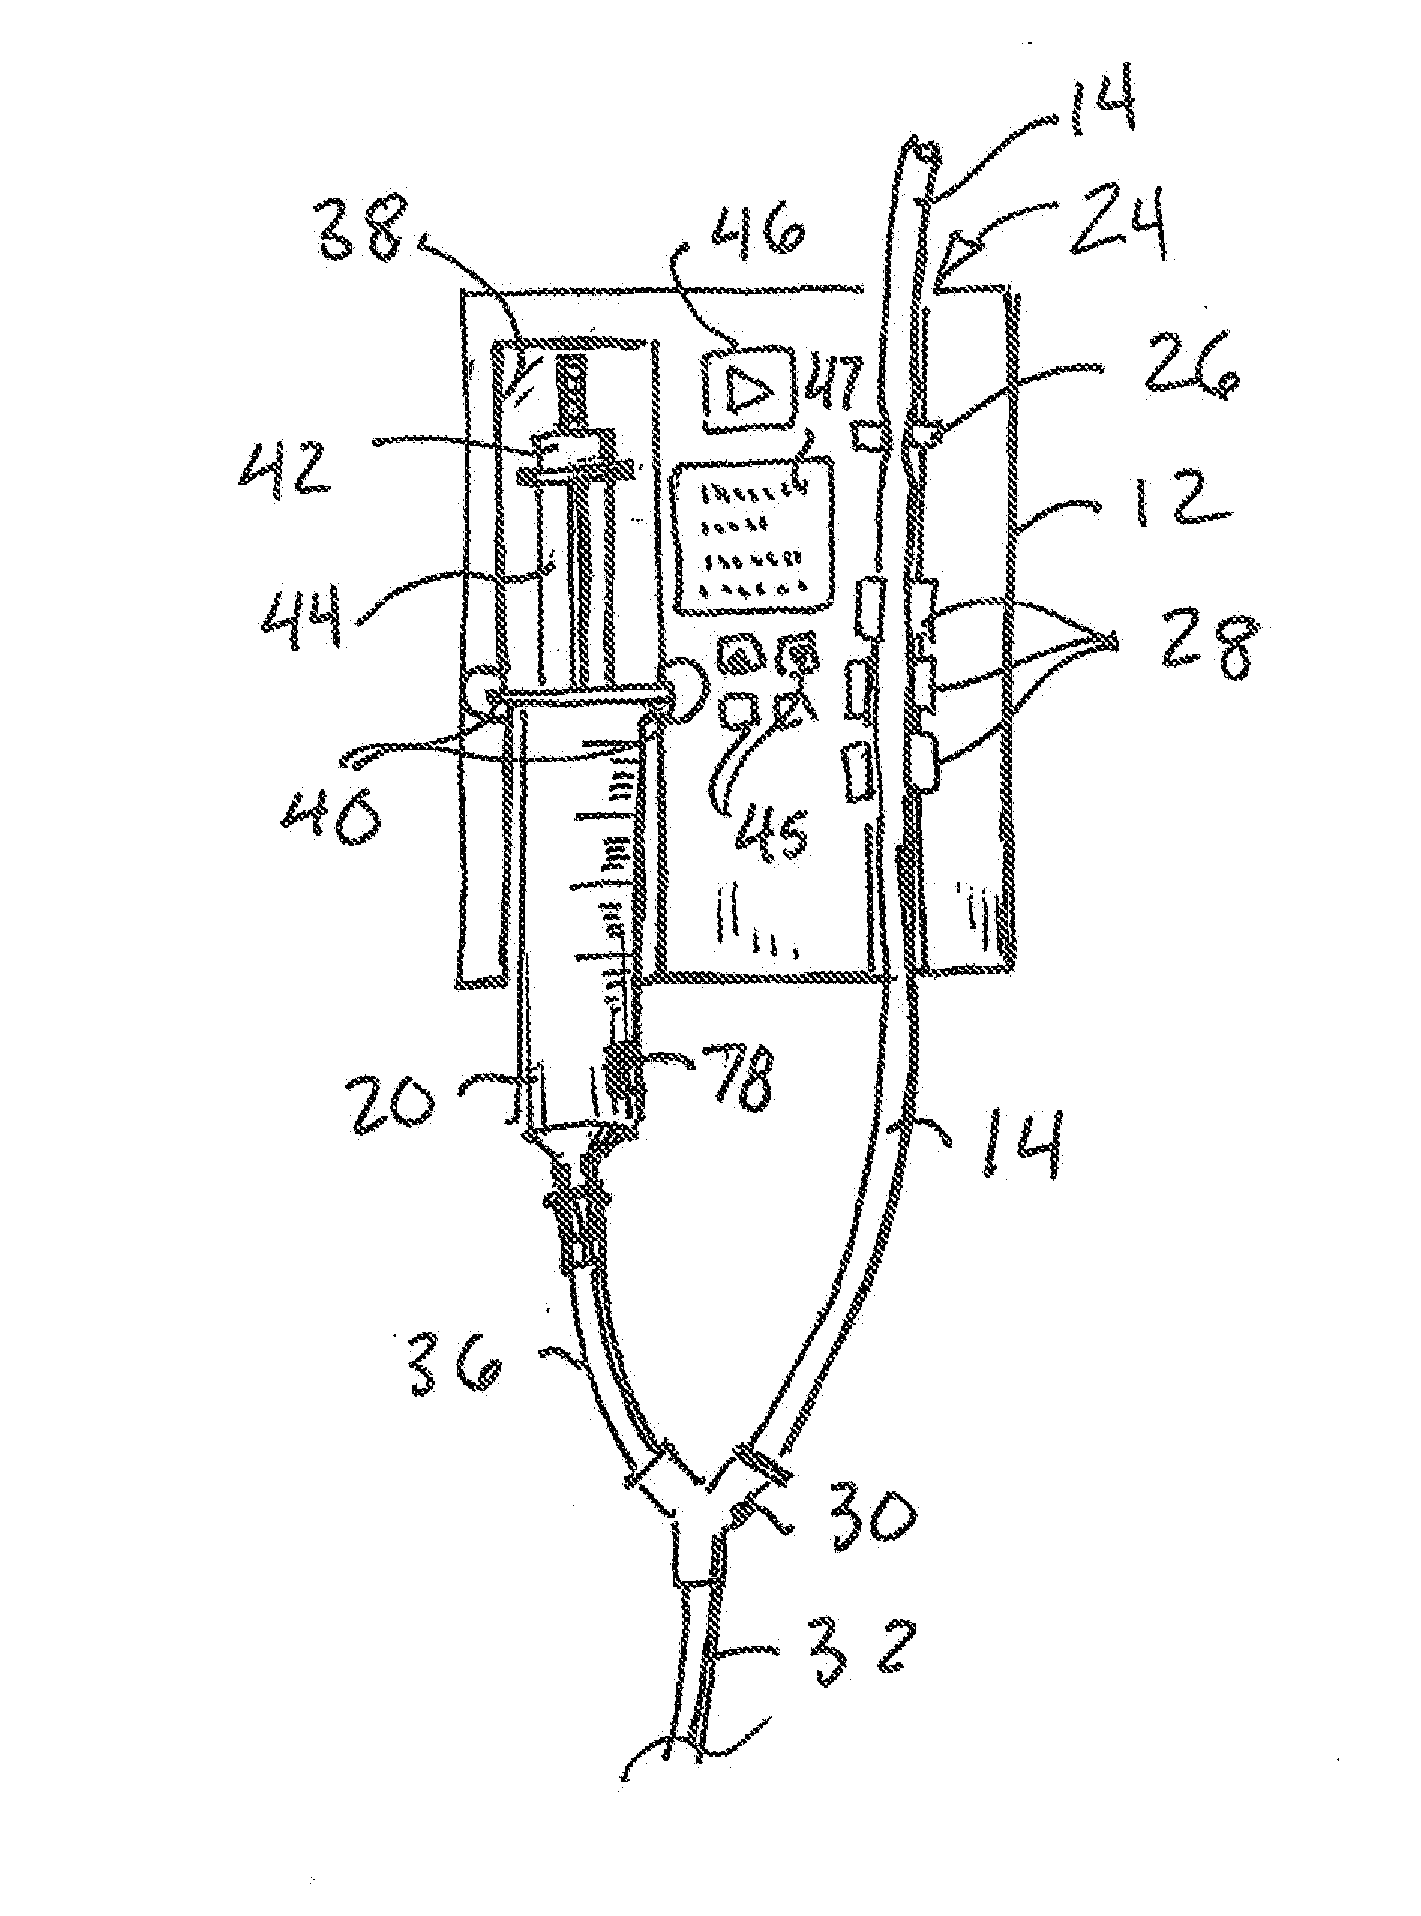 Therapy-specific medical pump